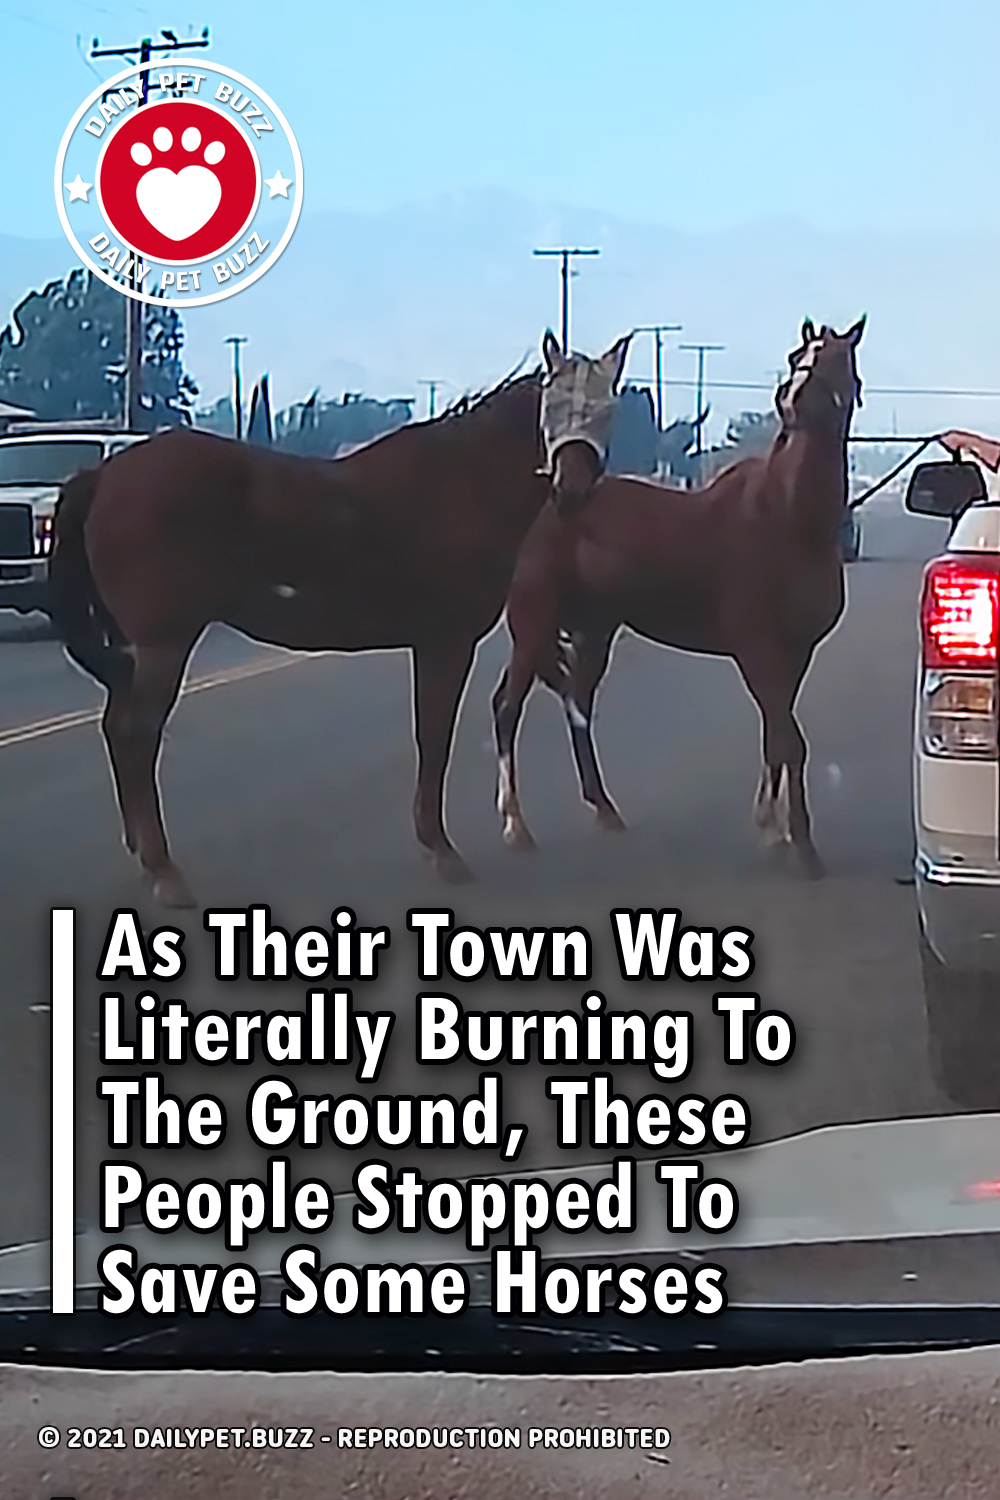 As Their Town Was Literally Burning To The Ground, These People Stopped To Save Some Horses